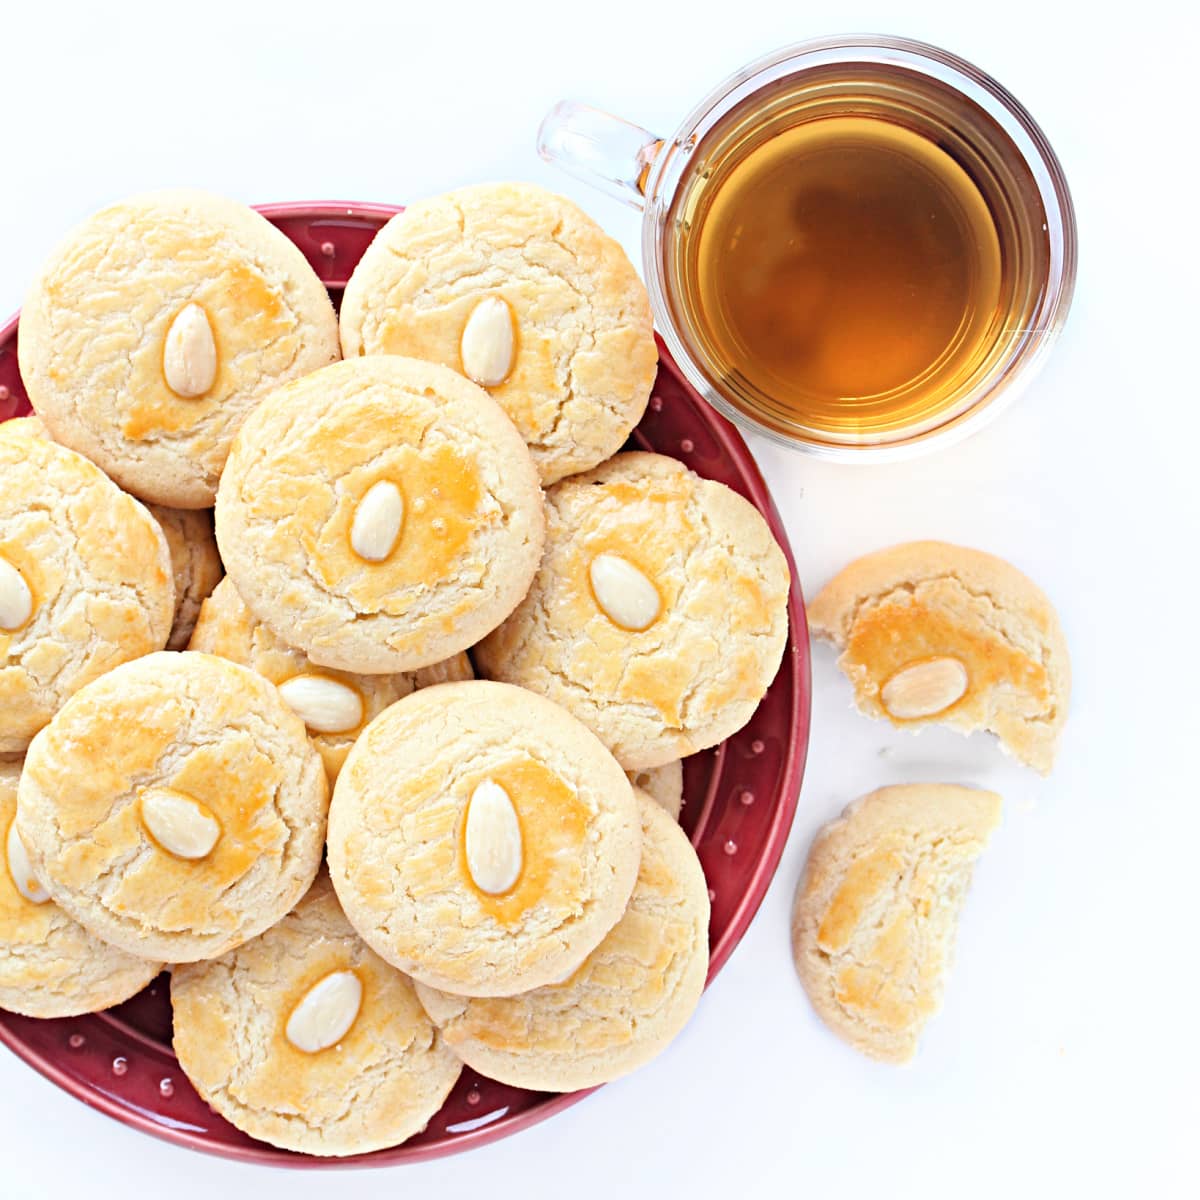 A plate of almond cookies with a cup of tea.